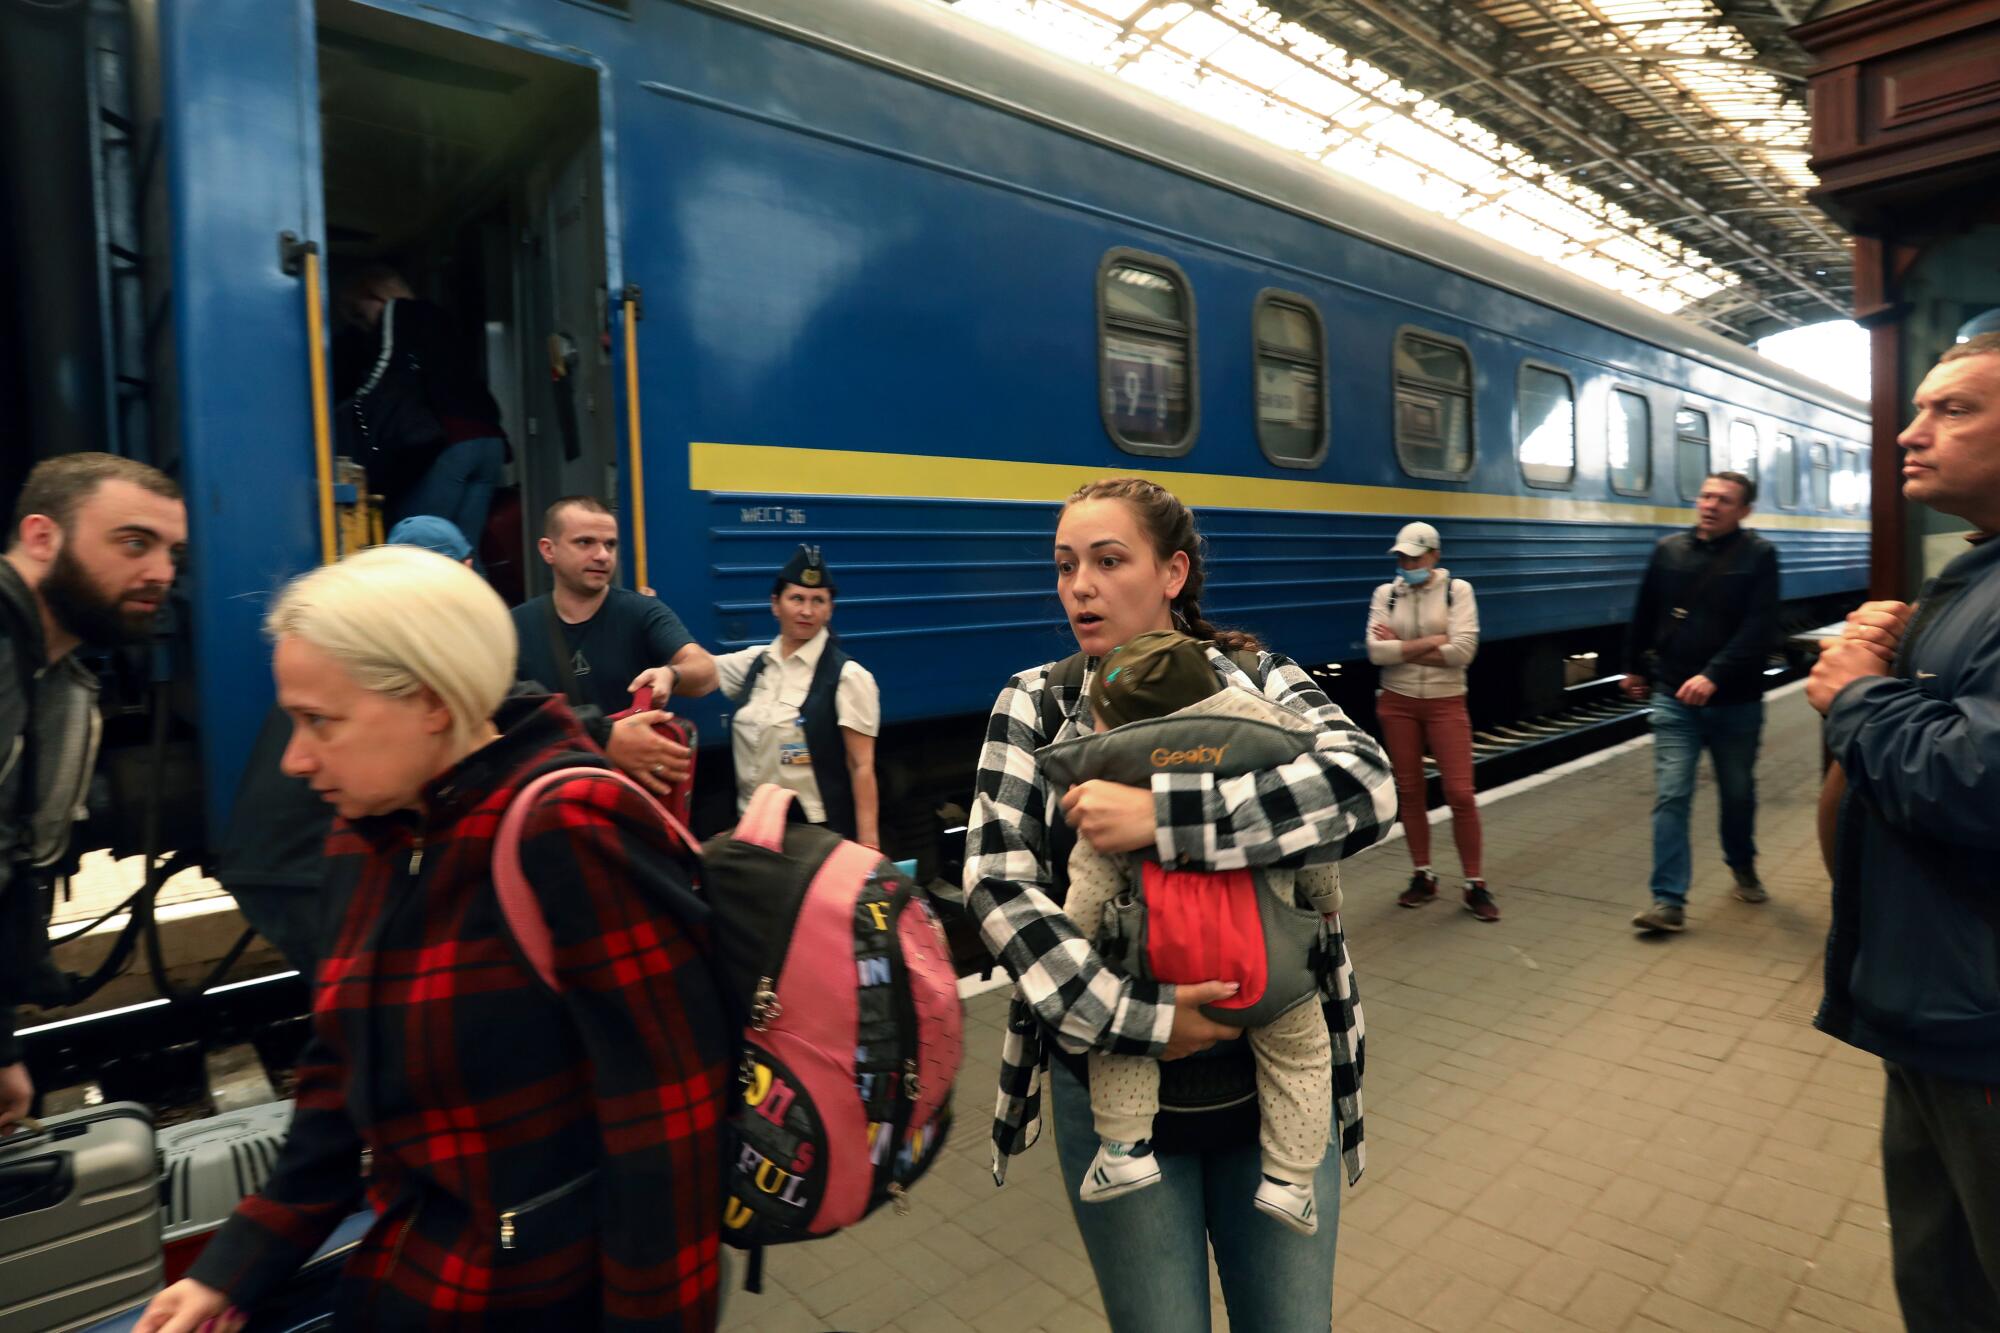 A woman with a backpack and another holding a baby are among the people disembarking from a blue train car with yellow stripe